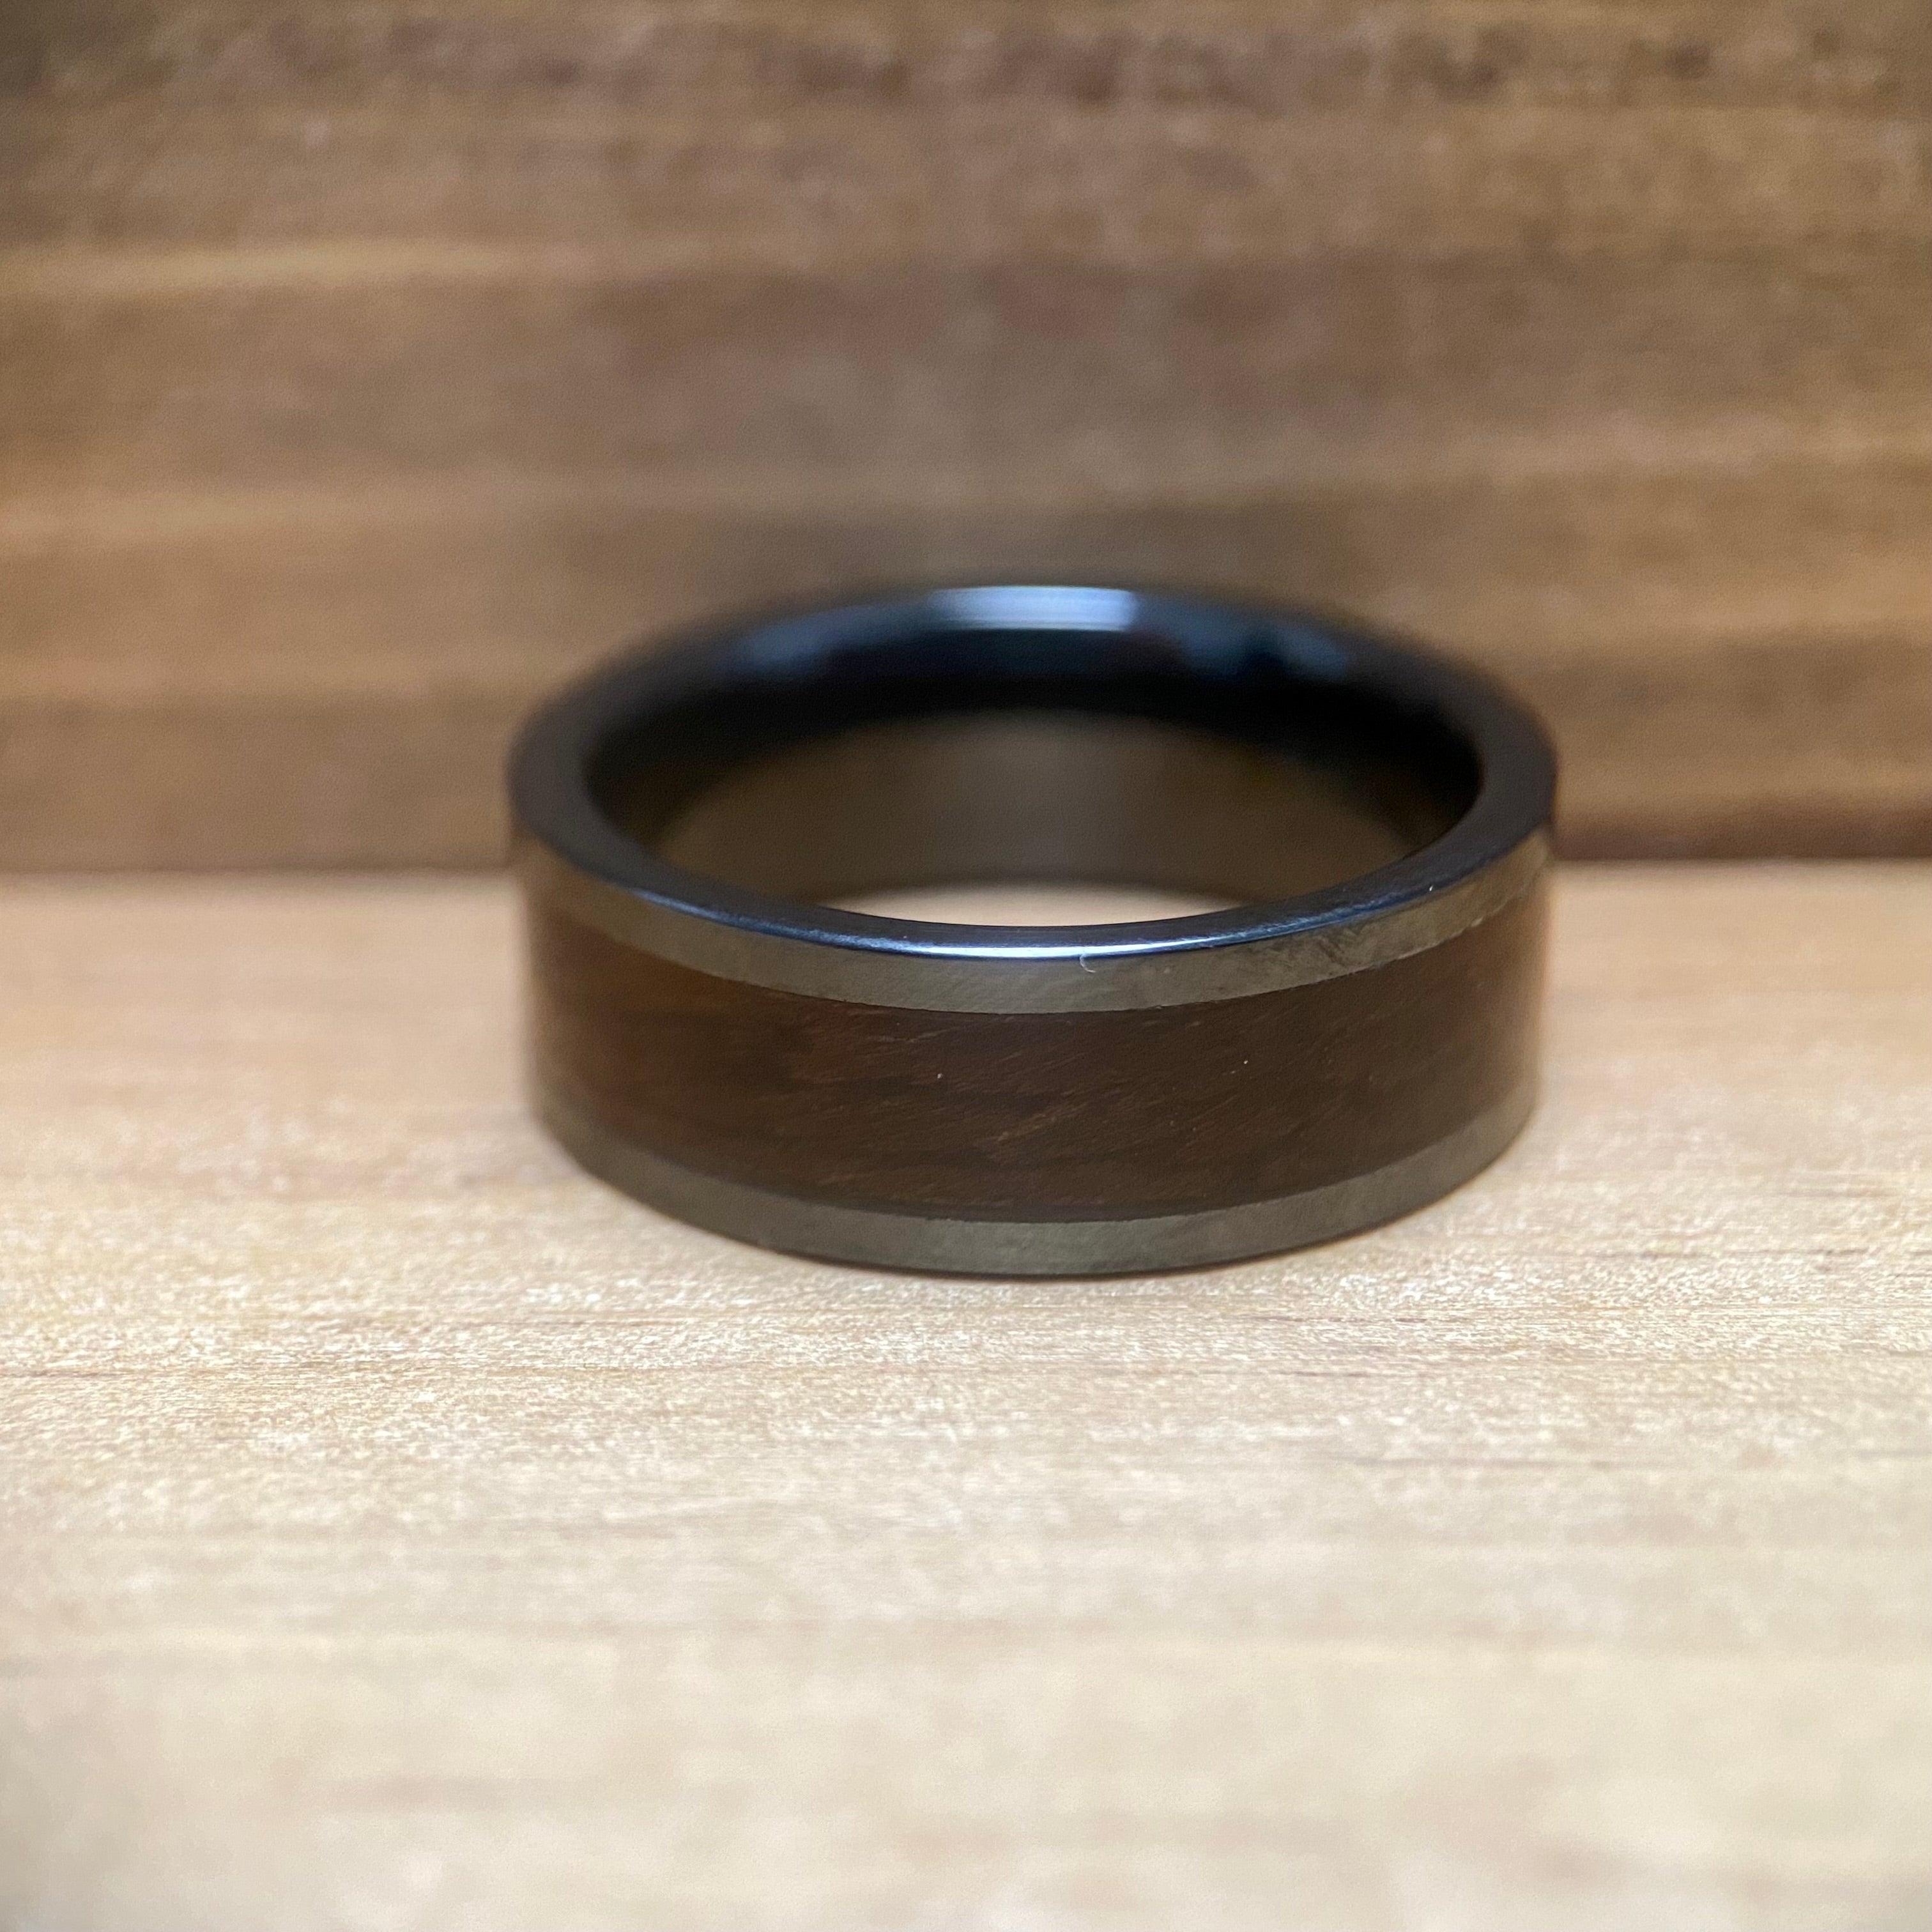 BW James Jewelers ALT Wedding Band “The H Potter” 100% USA Made Black Ceramic Ring With Wood From King's Cross Station